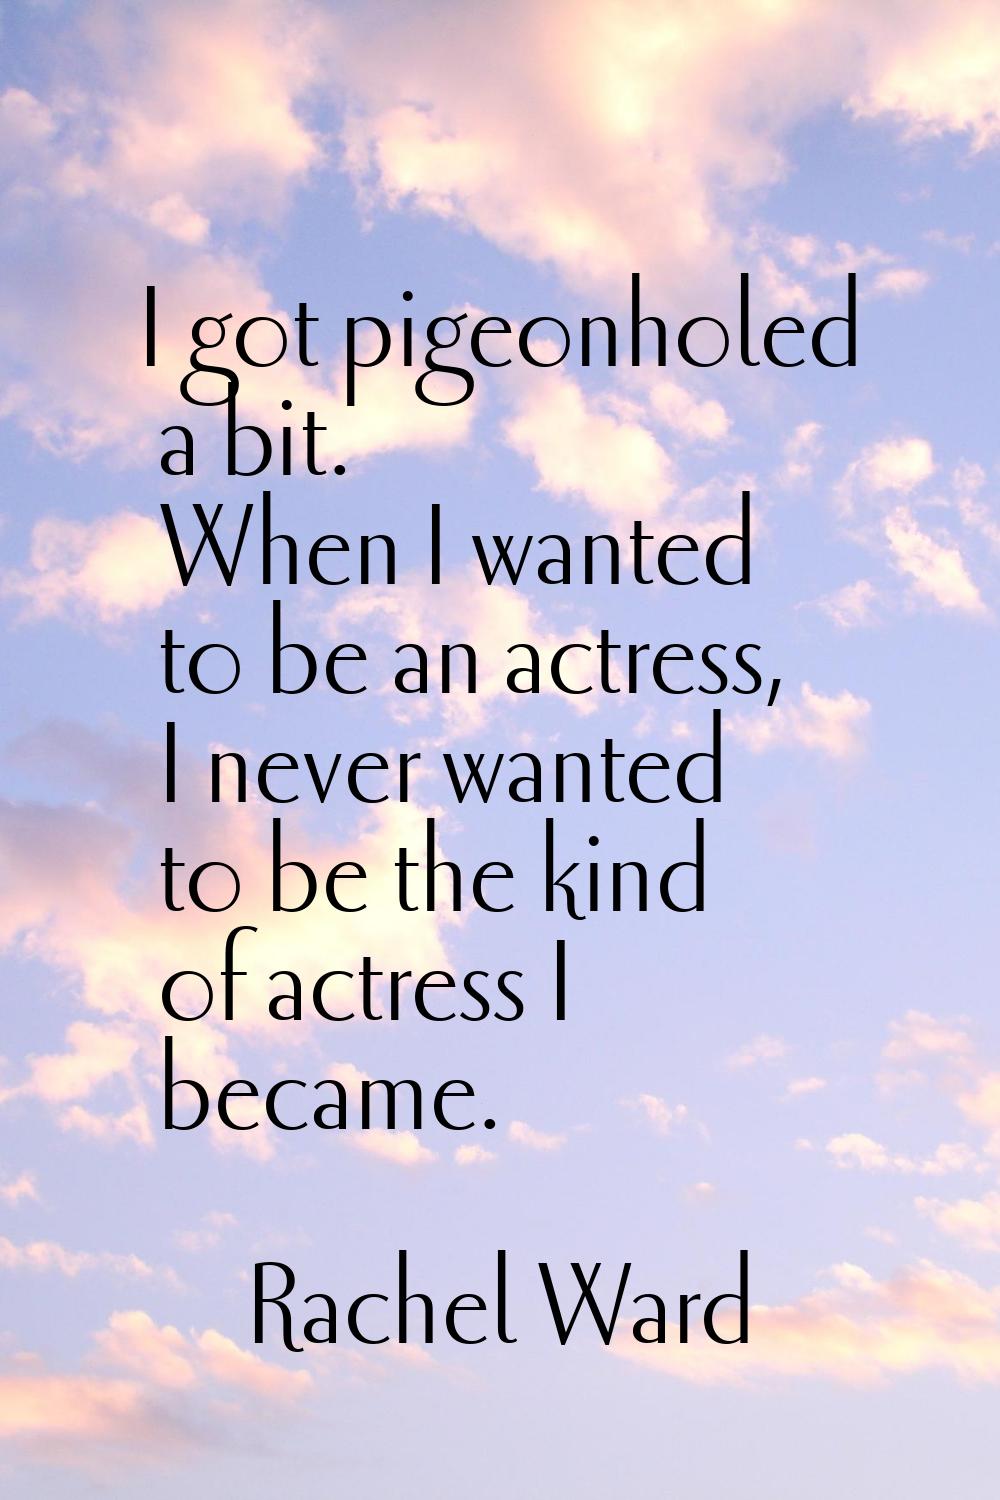 I got pigeonholed a bit. When I wanted to be an actress, I never wanted to be the kind of actress I